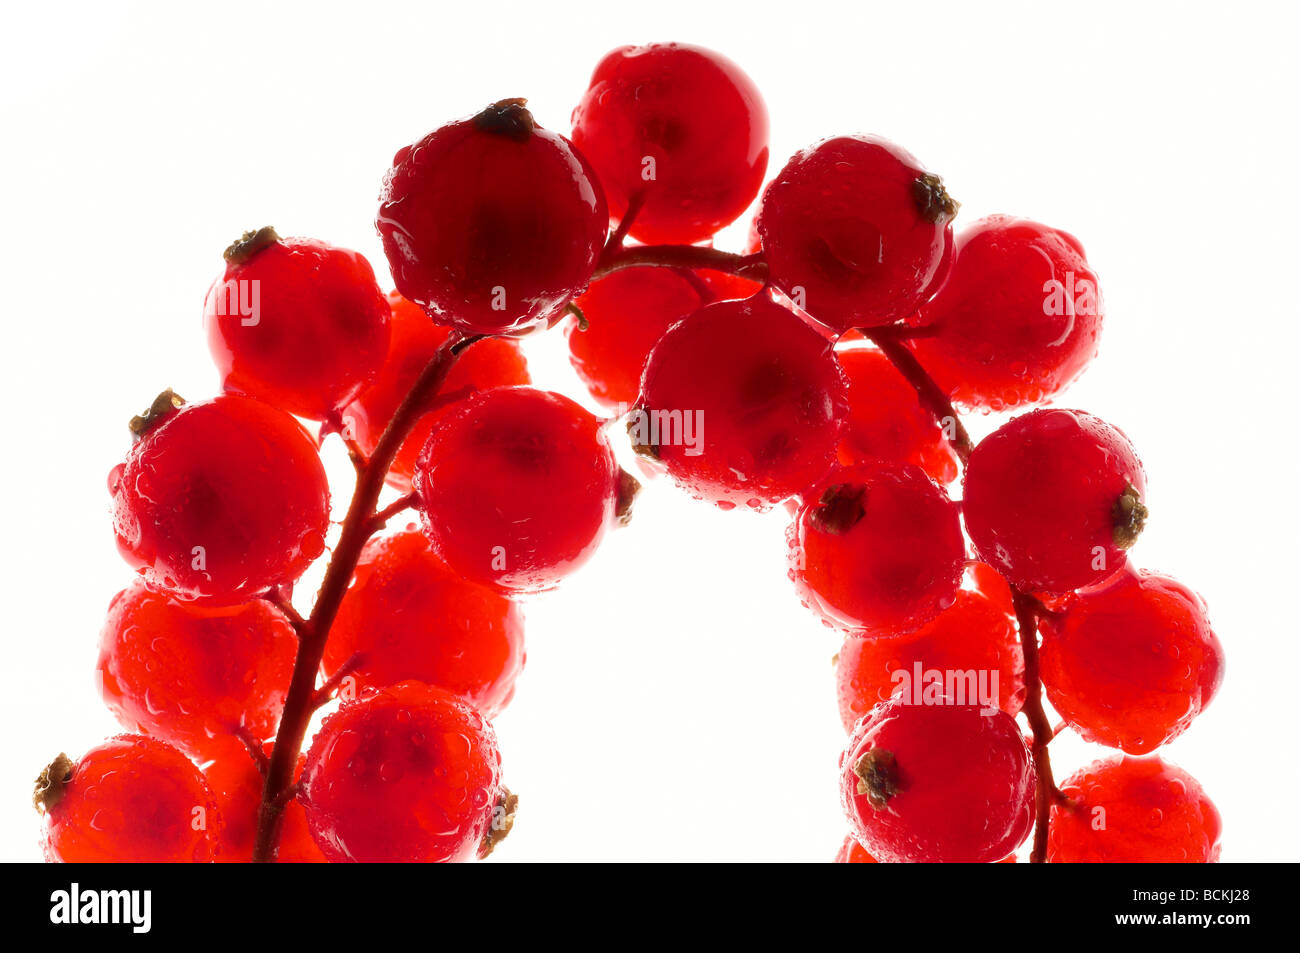 Cranberries on white background Stock Photo